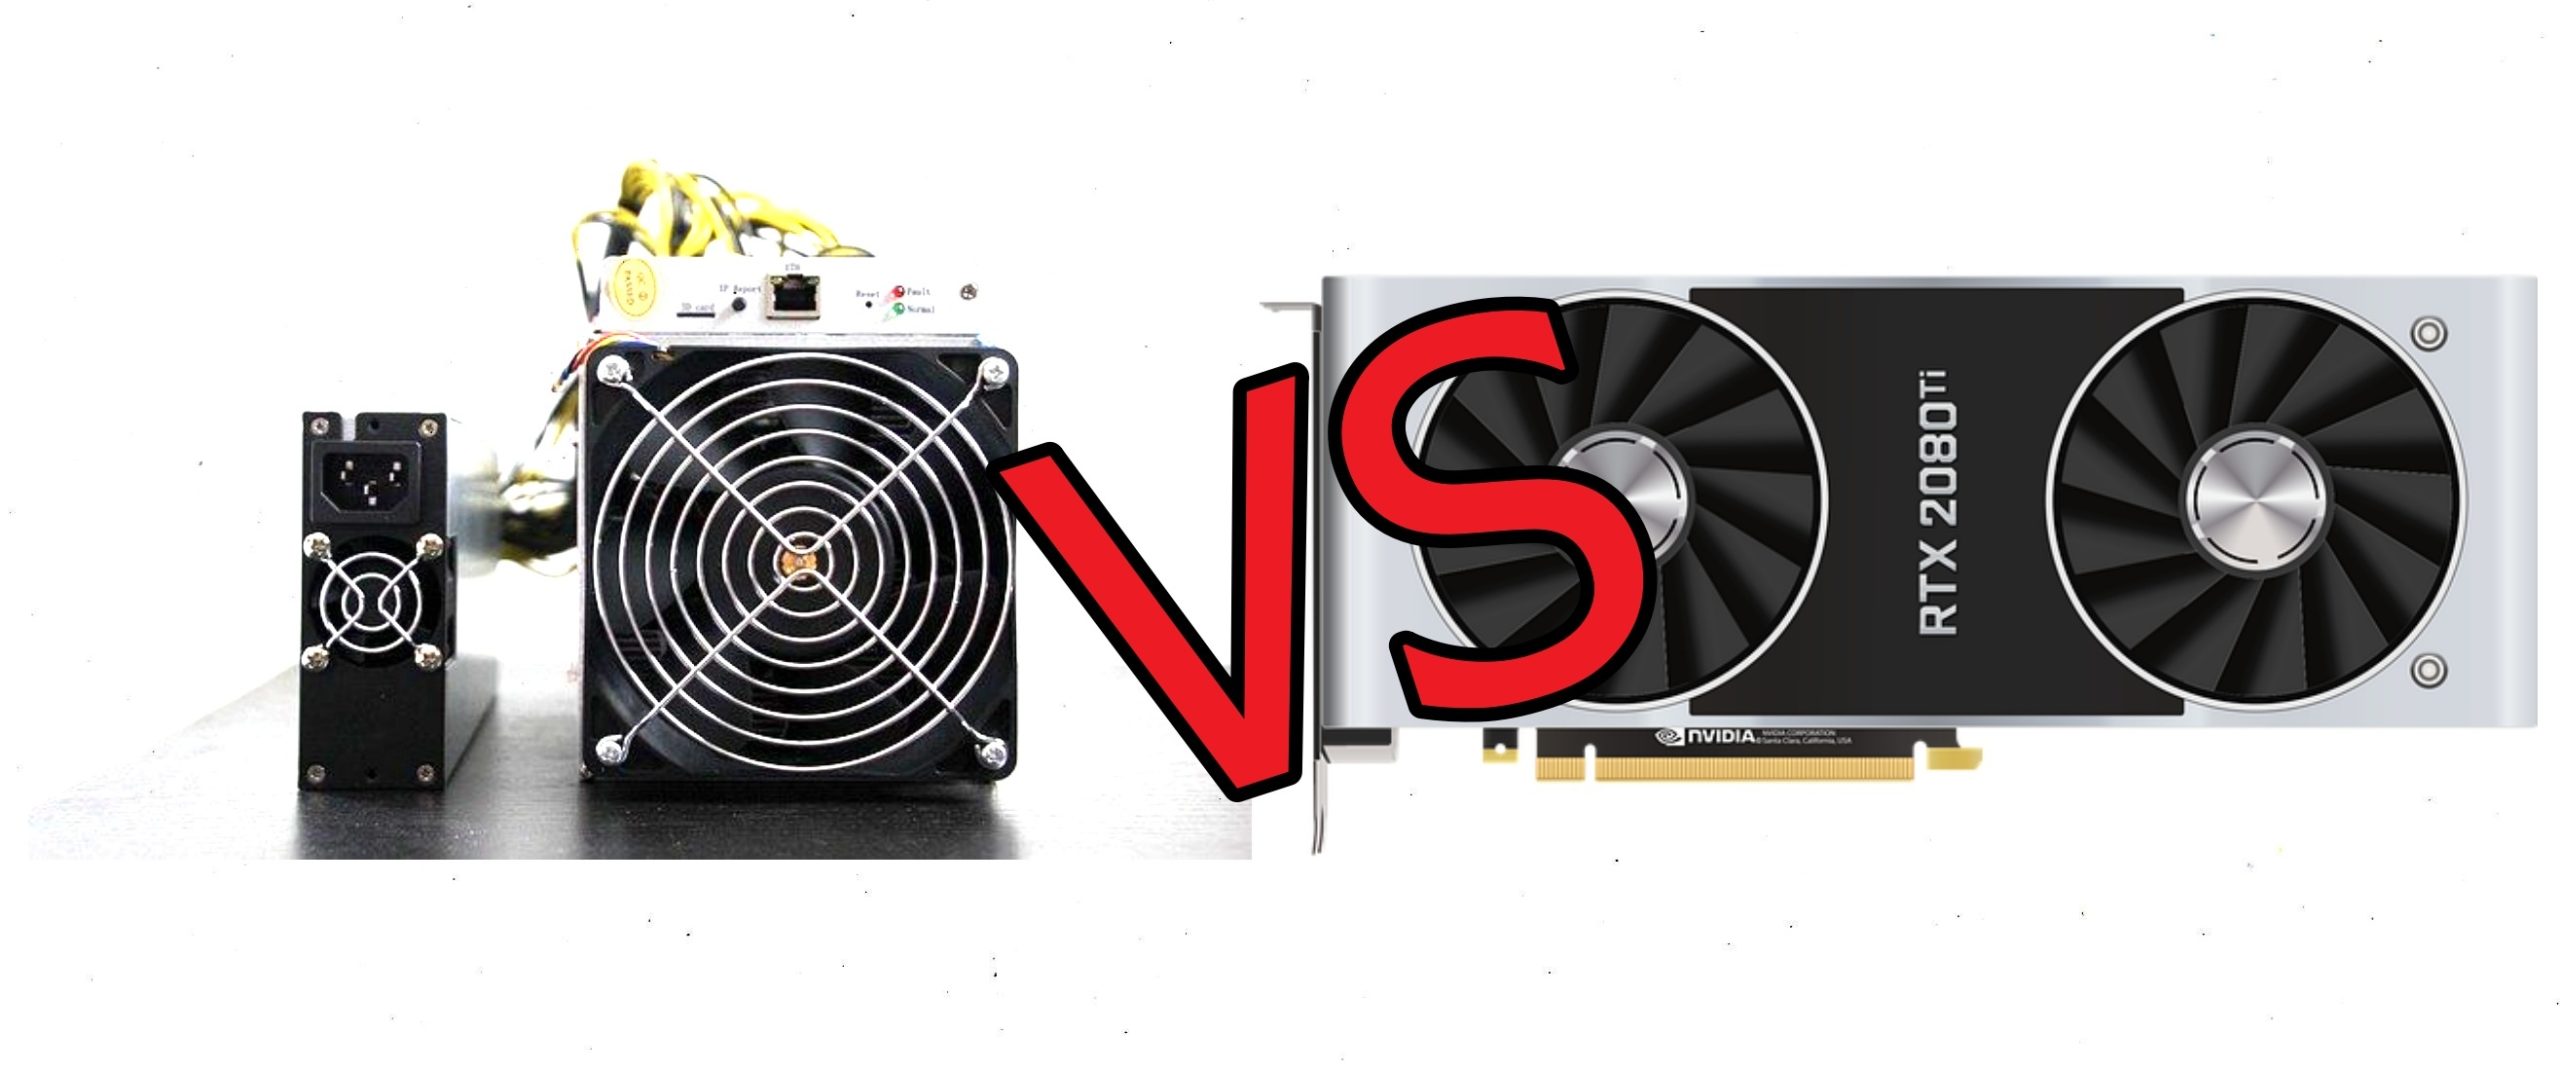 ASIC vs GPU Mining: Which Is Better in 2022?